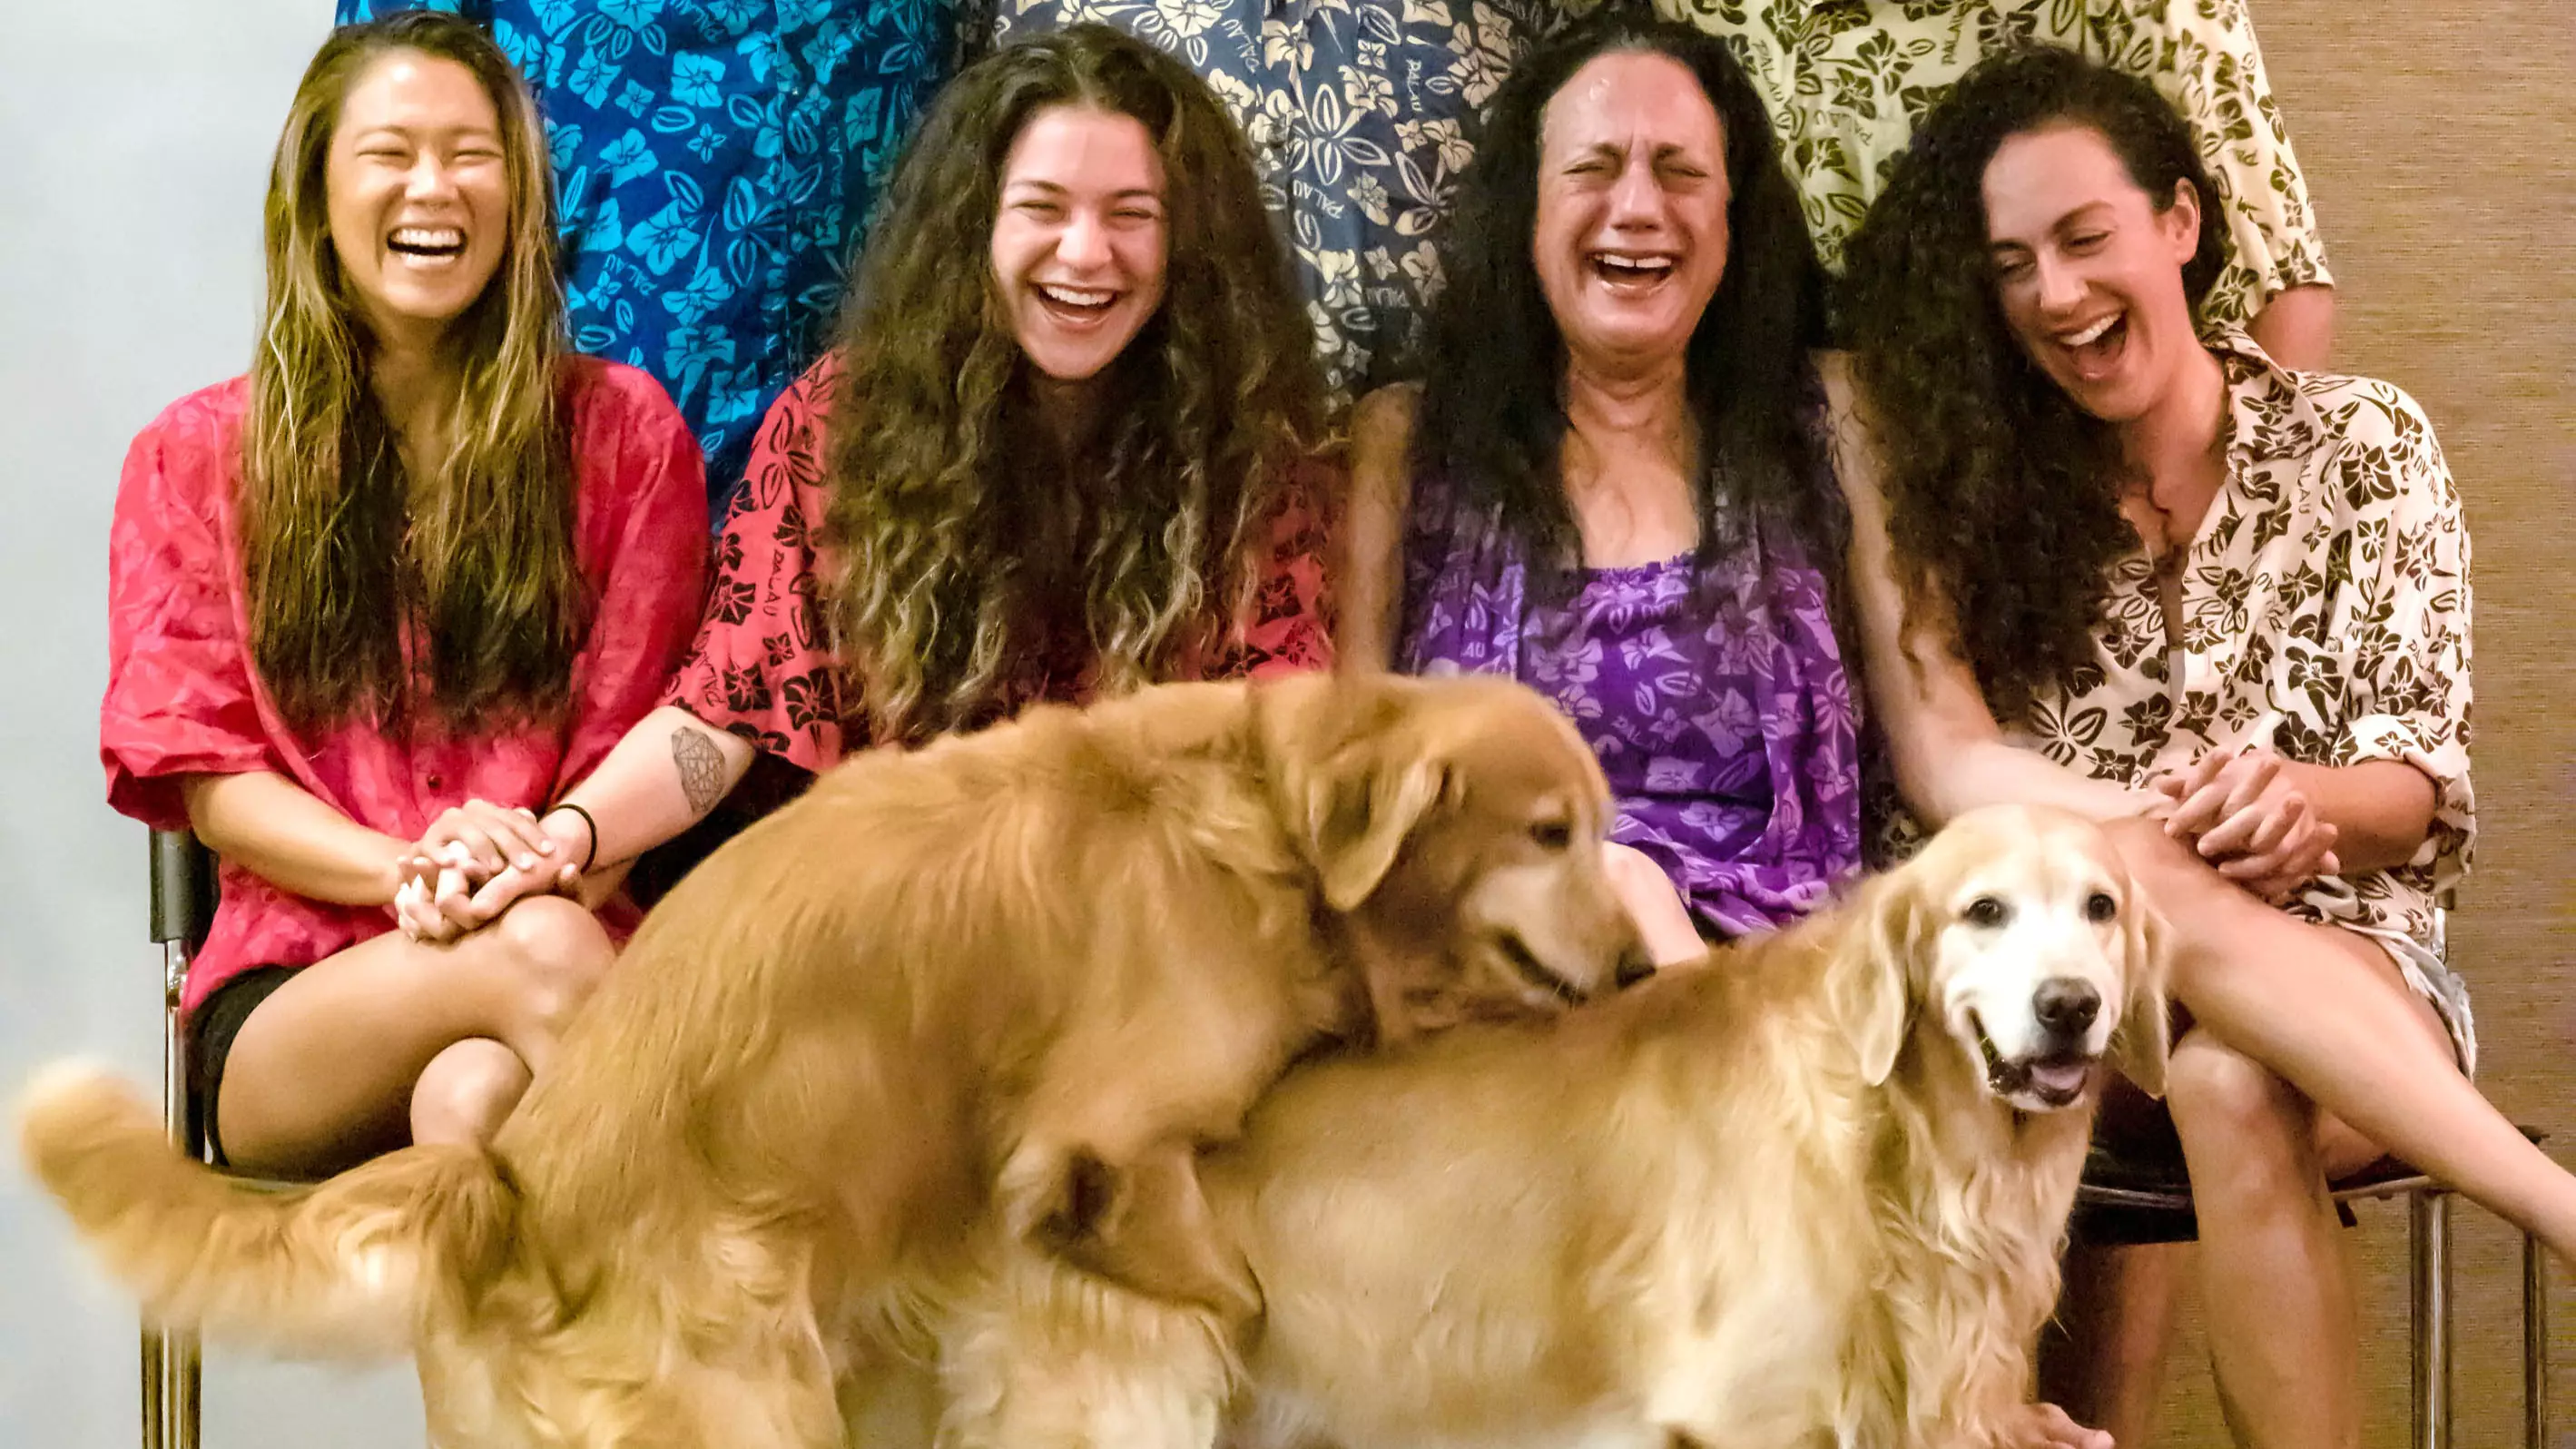 Randy Retrievers Hilariously Ruin Family Portrait In Viral Snap